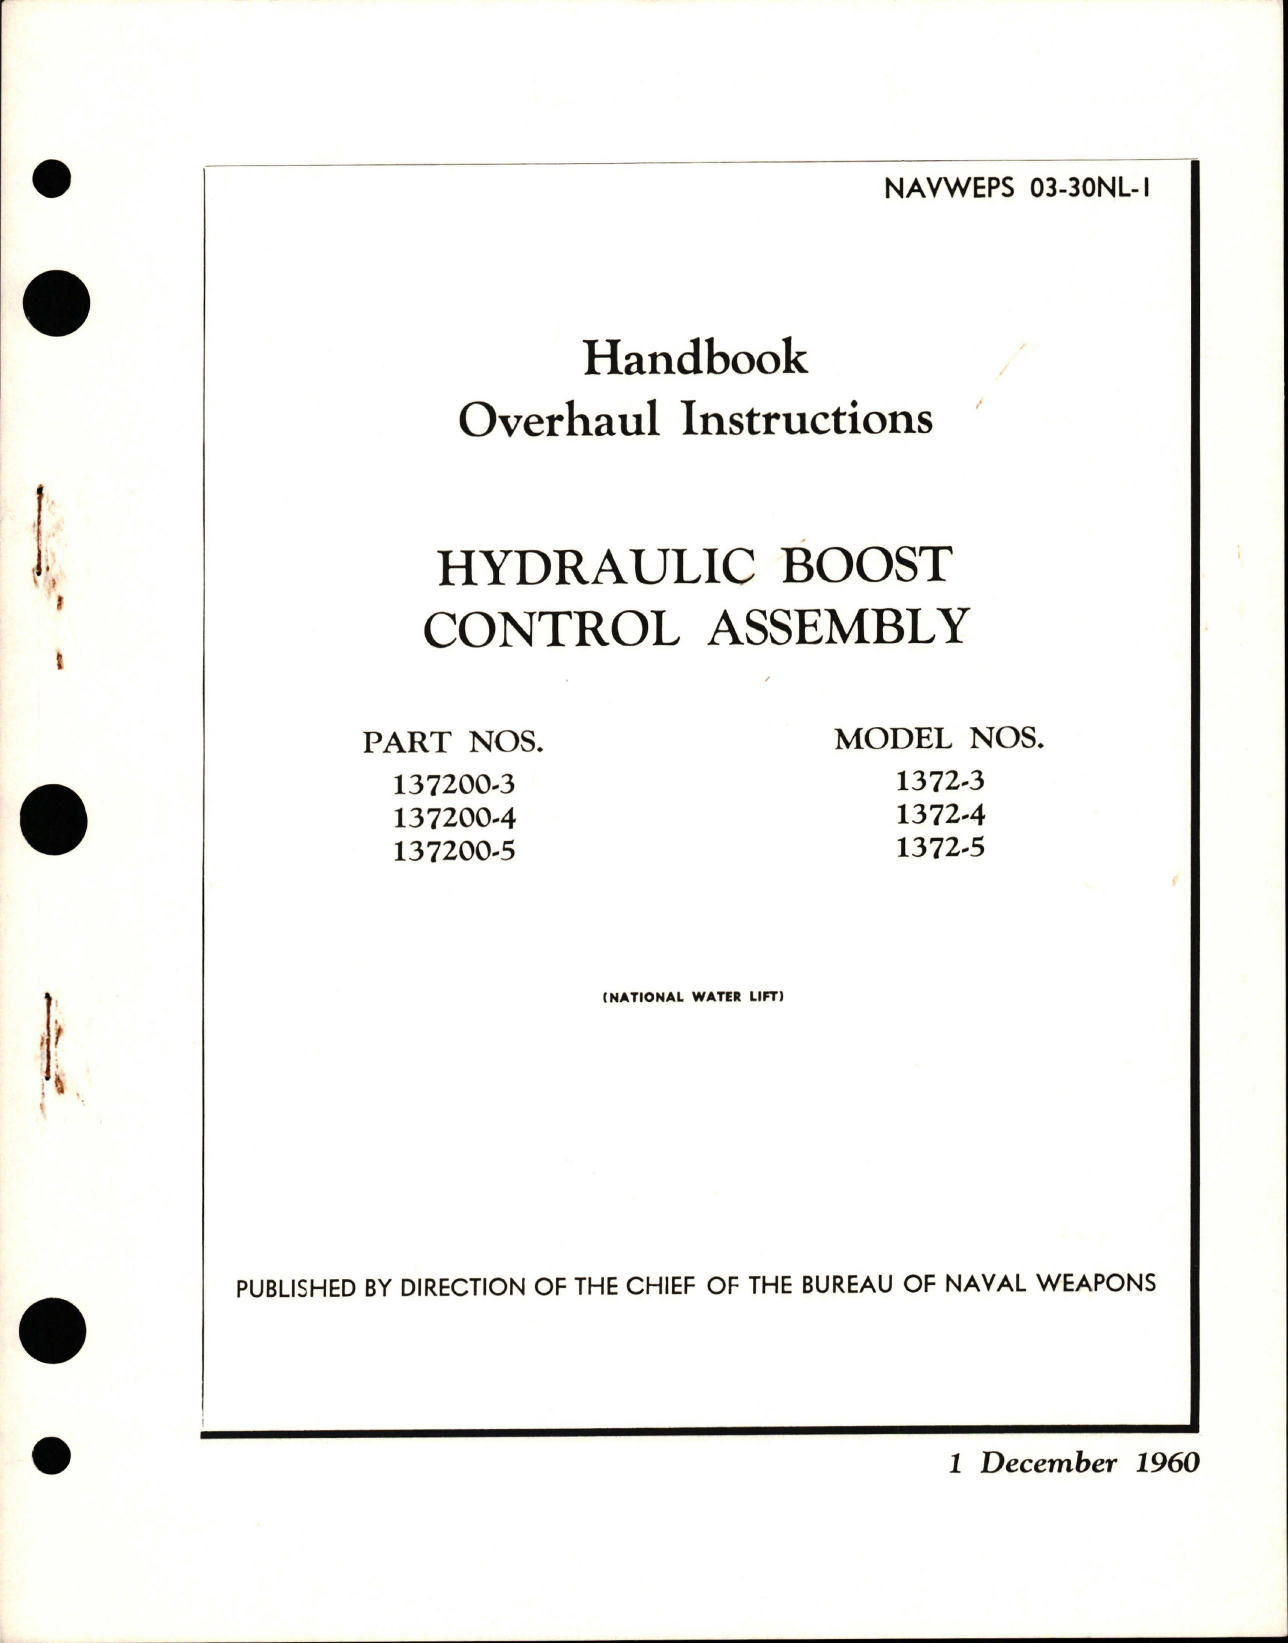 Sample page 1 from AirCorps Library document: Overhaul Instructions for Hydraulic Boost Control Assembly - Parts 137200-3, 137200-4, and 137200-5